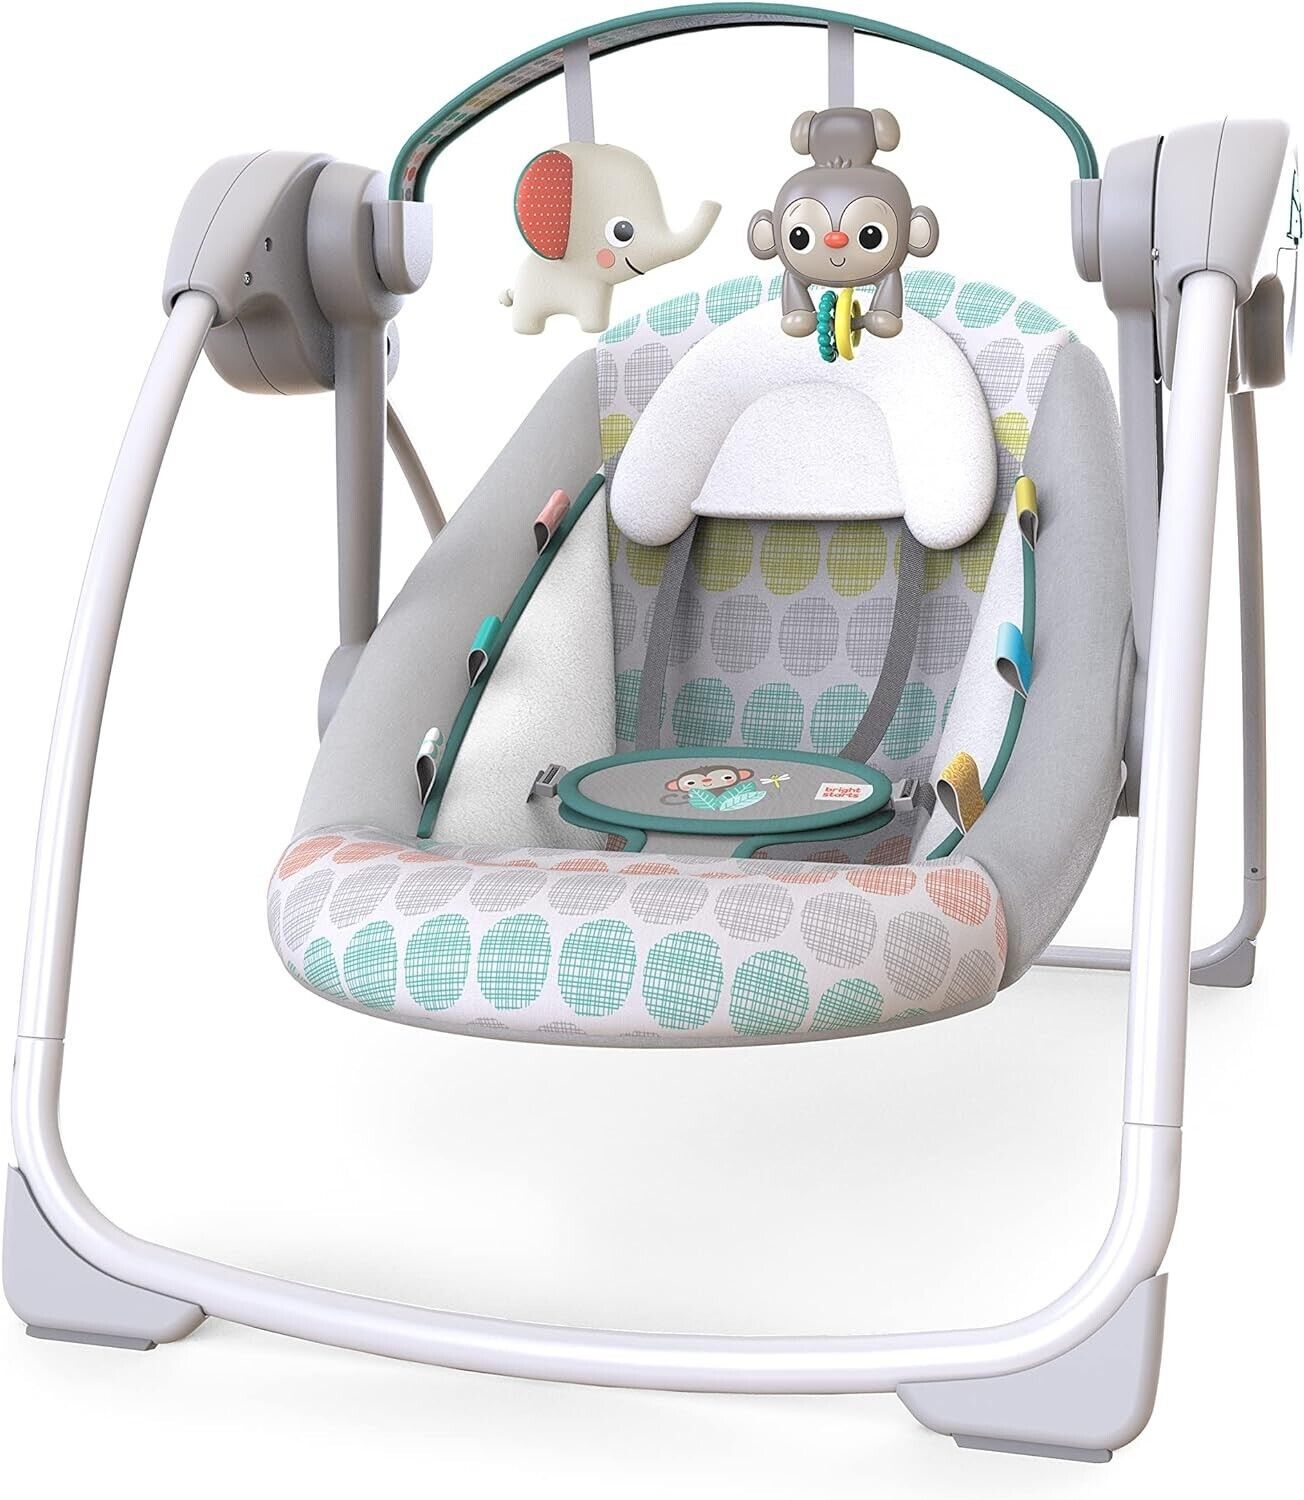 Bright Starts Portable Automatic 6-Speed Baby Swing with Adaptable Speed - $68.32